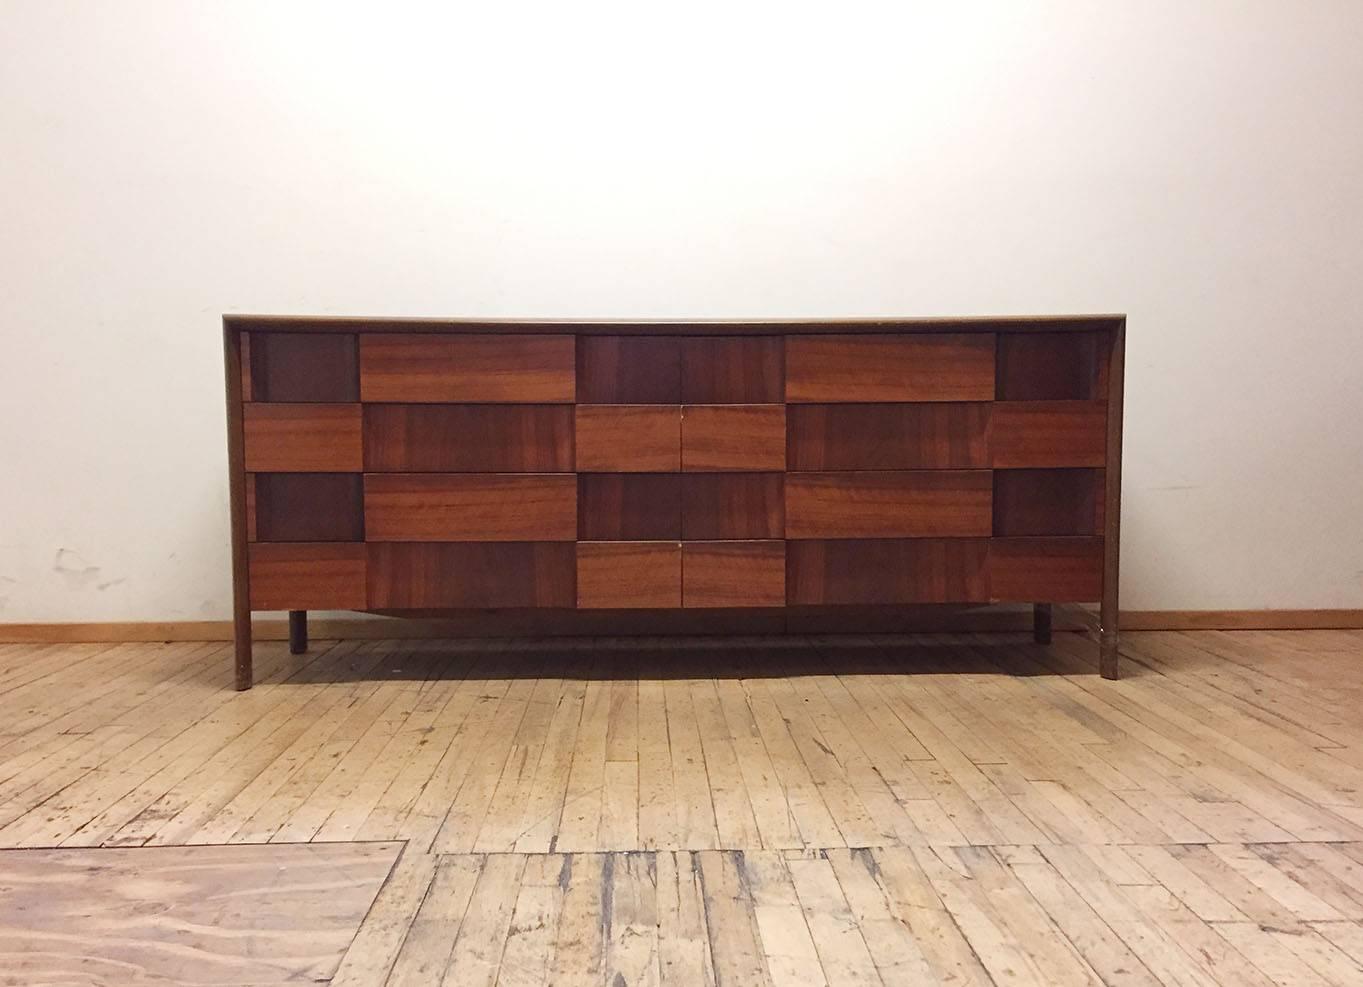 Great opportunity to acquire an Exceptional dresser credenza by Edmond Spence. Eight drawers in total. Edmond Spence was an American designer producing a fair amount of his work in Sweden. 

Some Wear scratches to the original finish. 
rear back leg